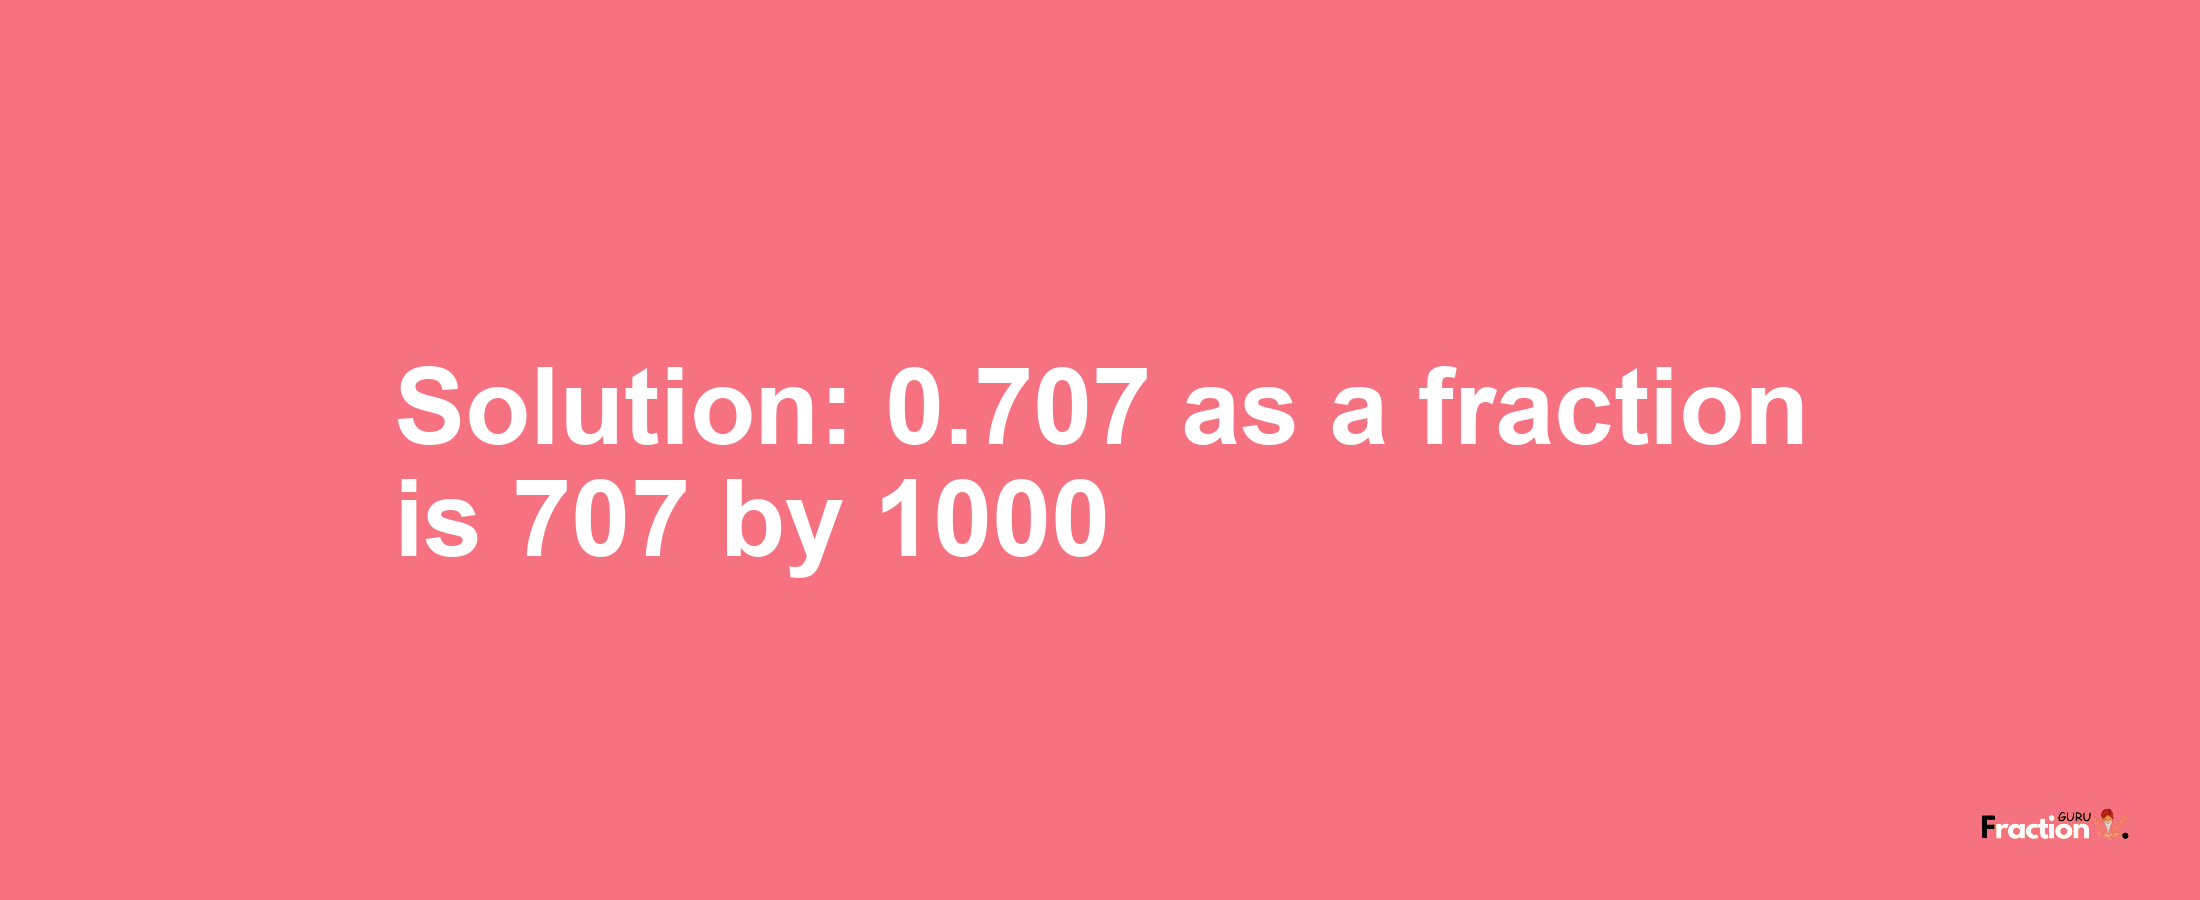 Solution:0.707 as a fraction is 707/1000